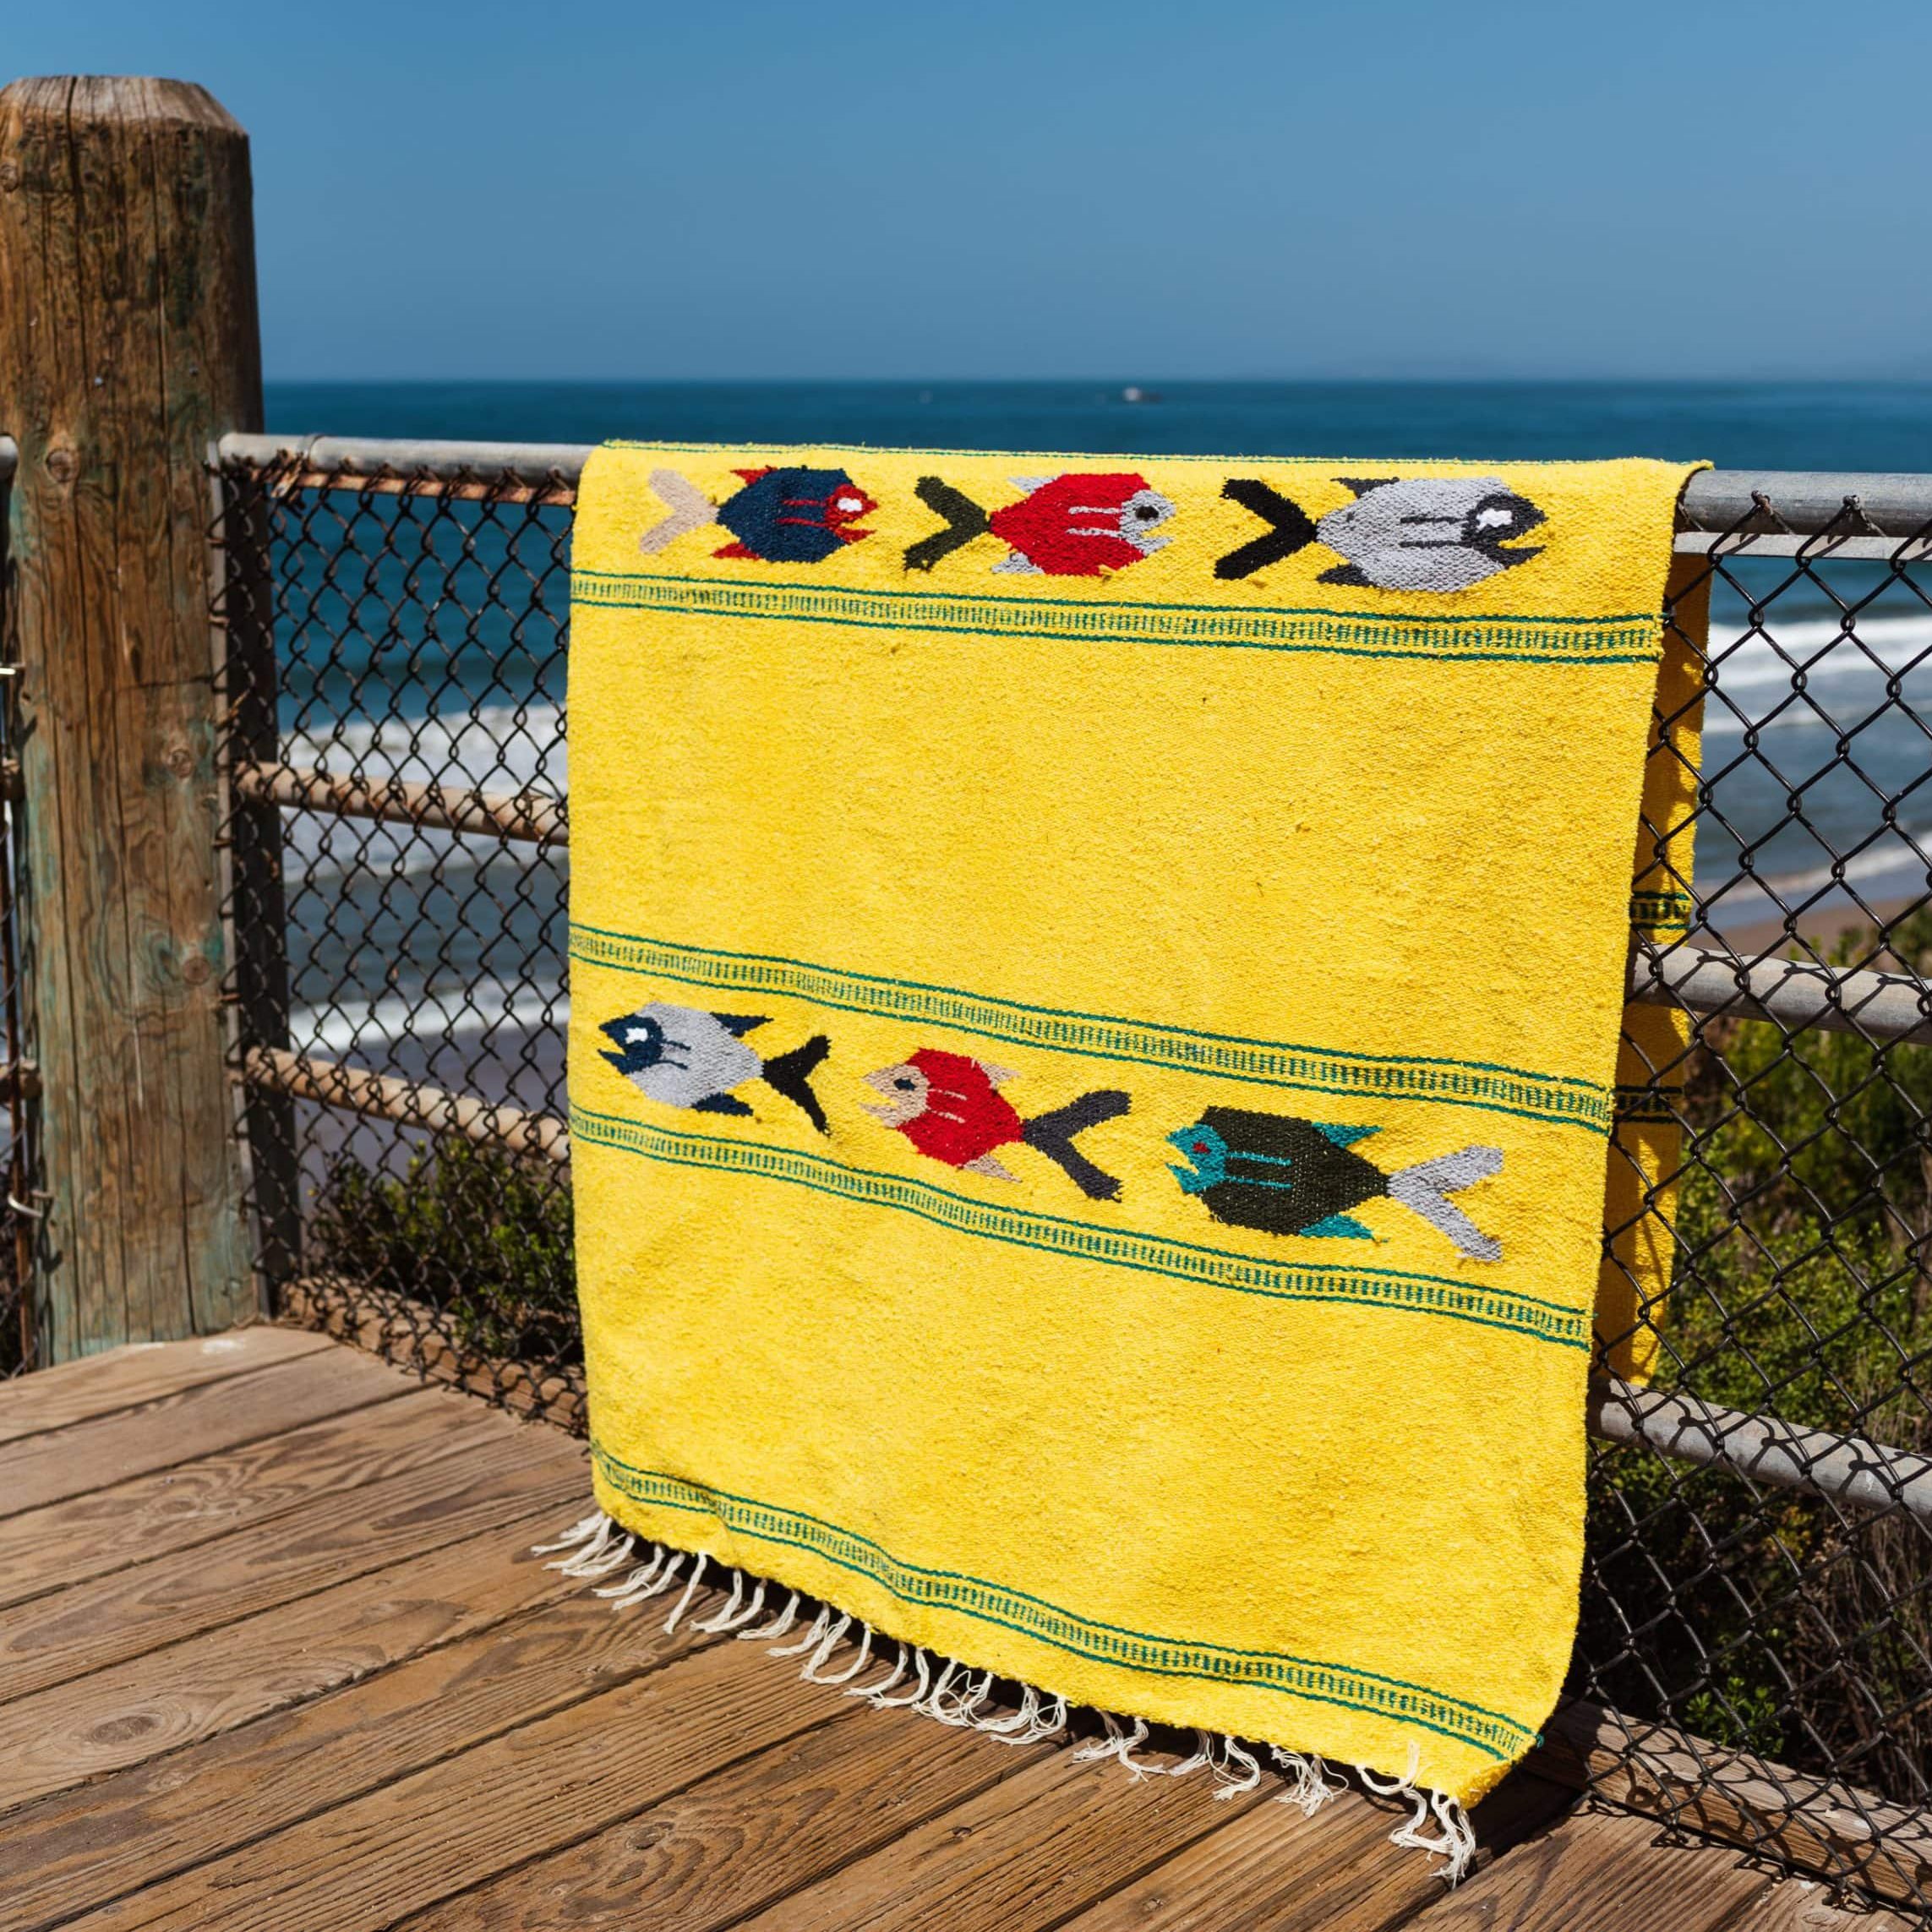 Yellow mexican blanket "under the sea blanket" with colored fish